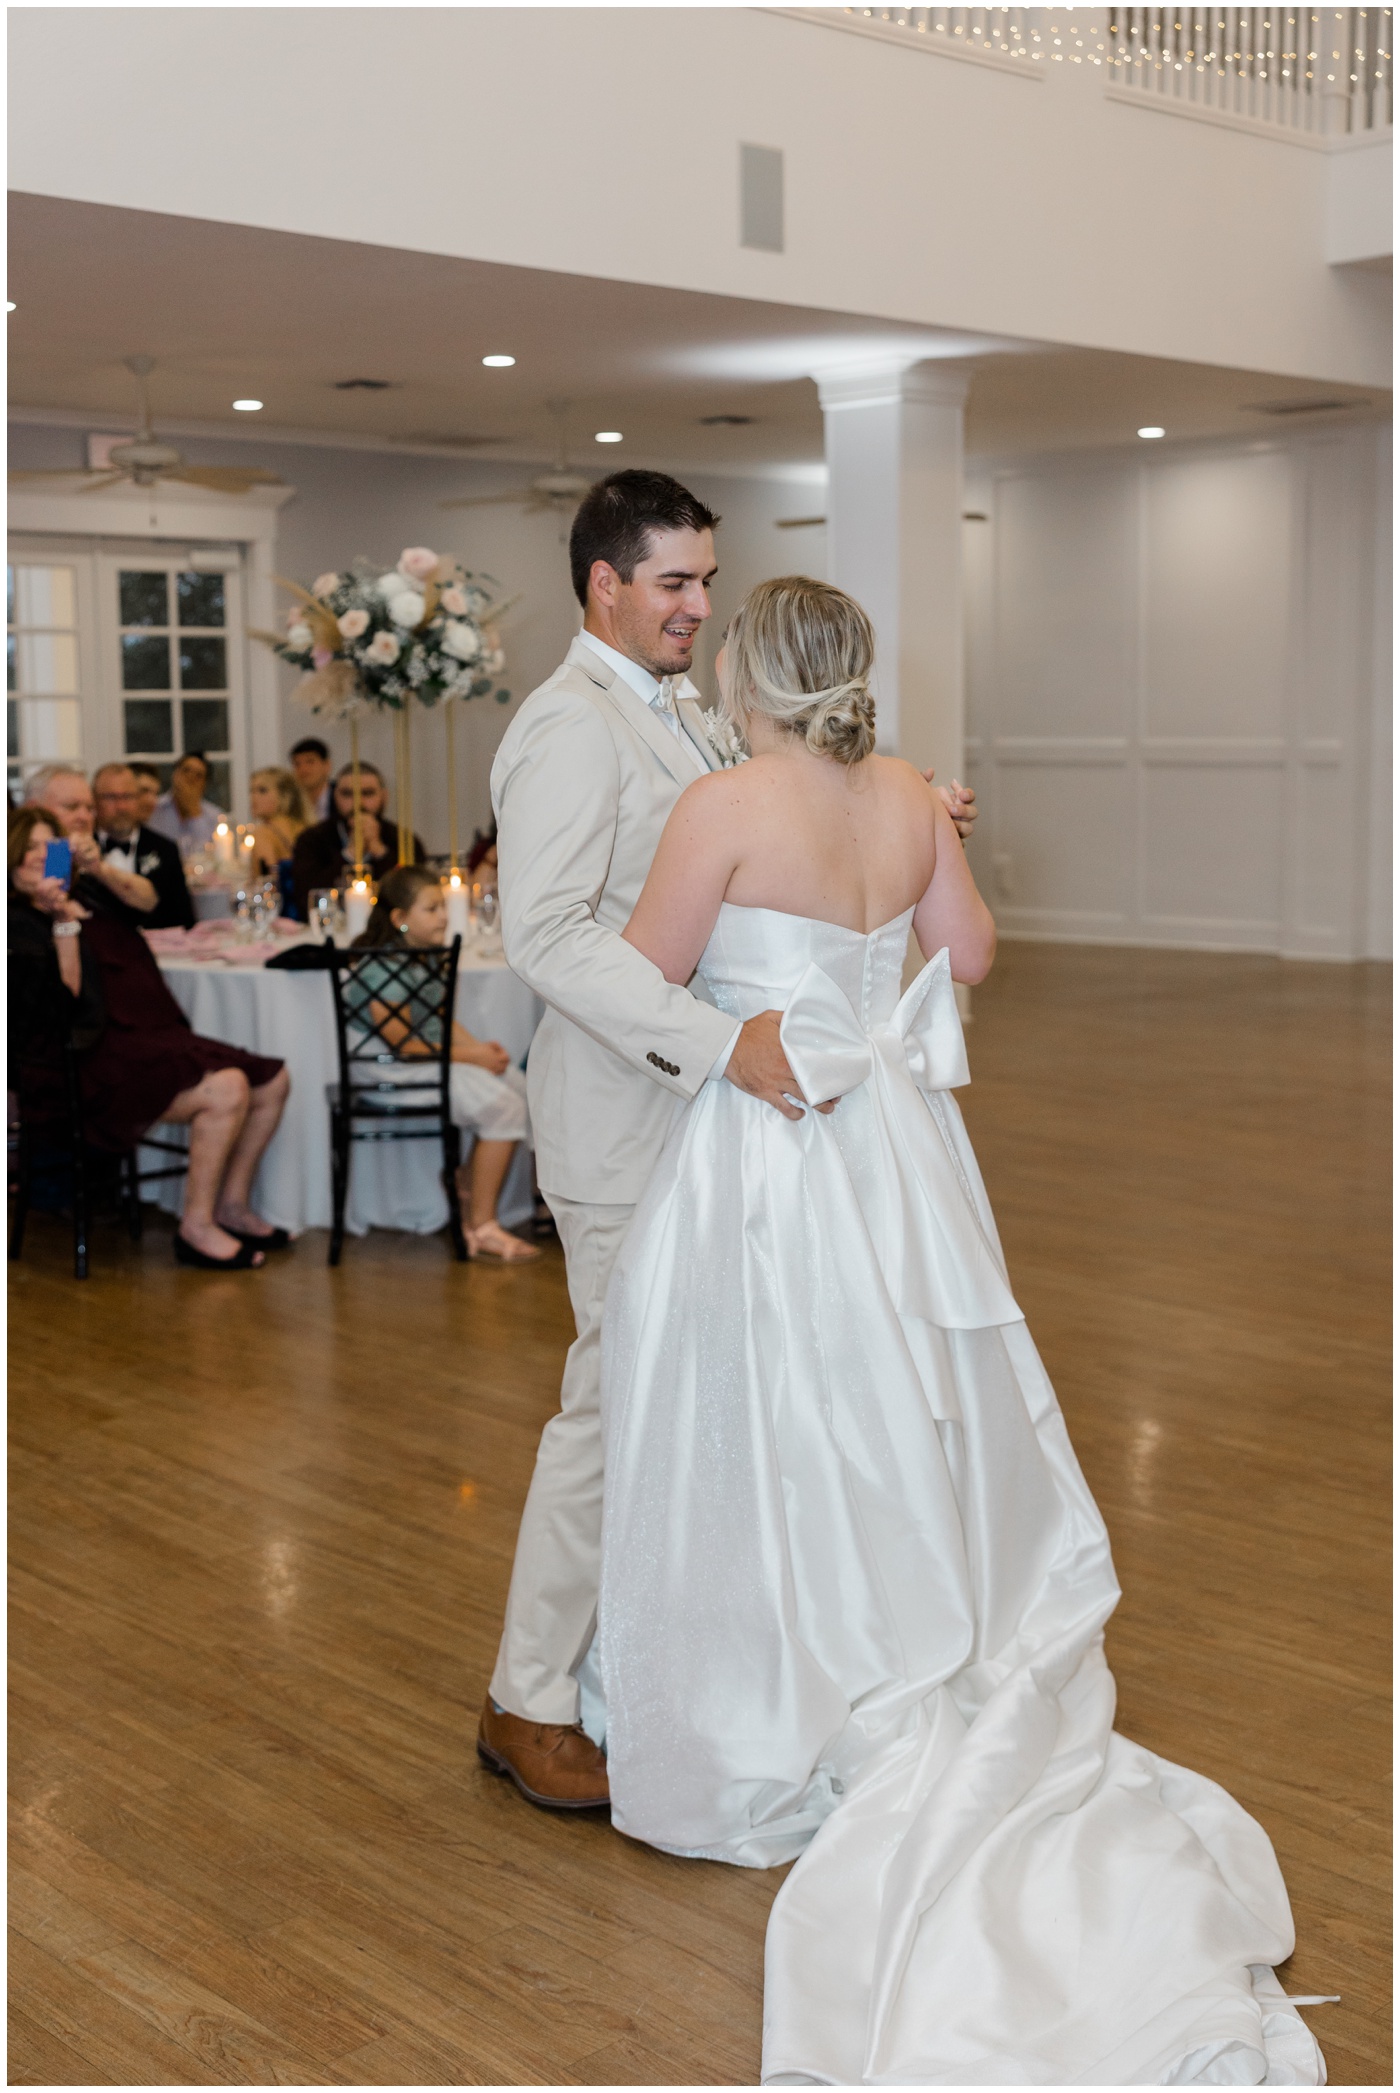 The bride and groom share their first dance